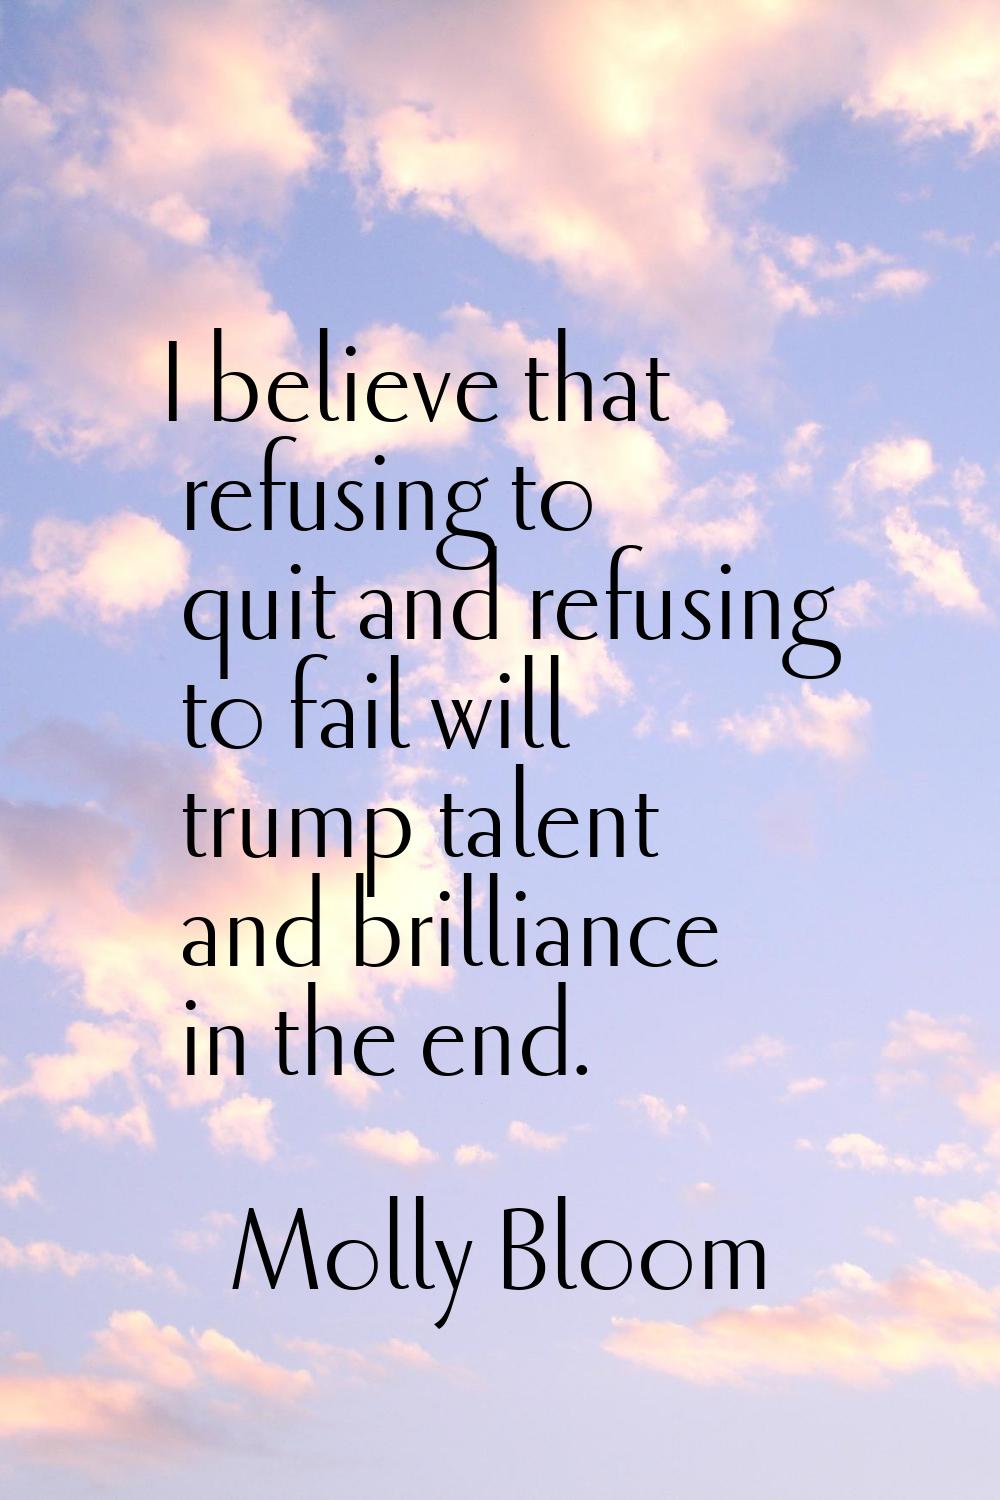 I believe that refusing to quit and refusing to fail will trump talent and brilliance in the end.